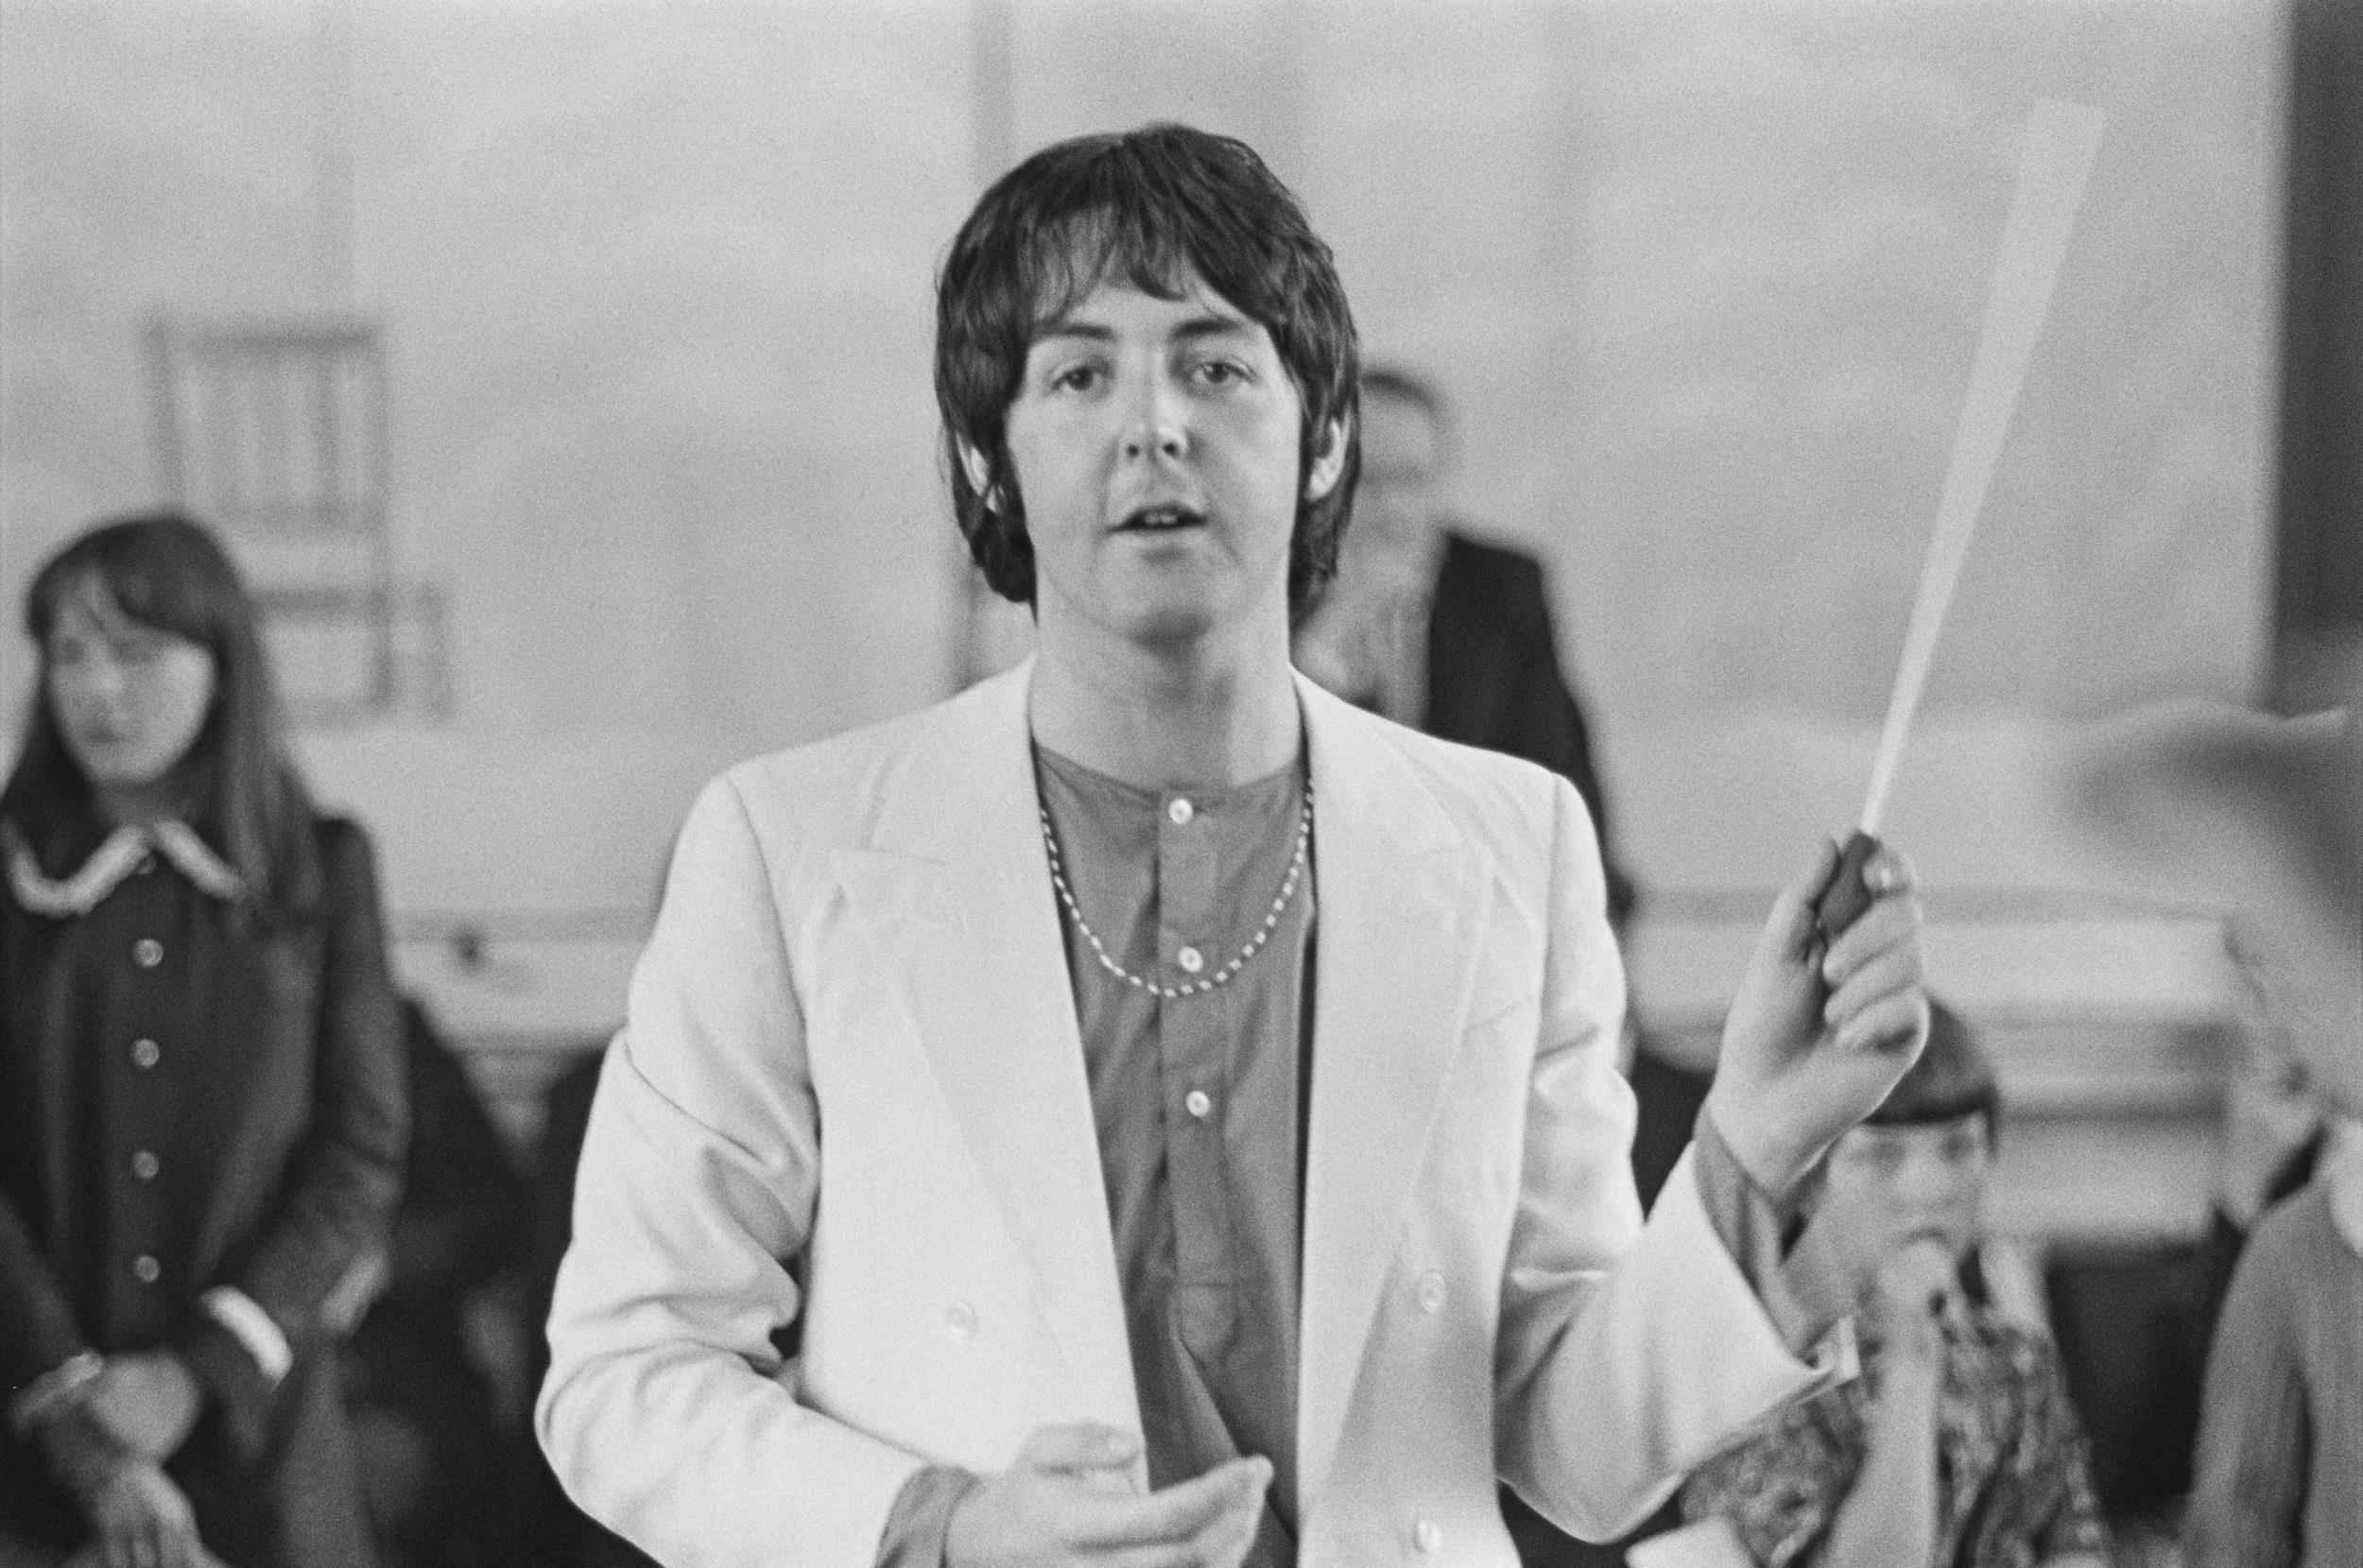 <p>Opinions vary among Beatles fans, save for in regard to “Hey Jude." This is a top-five track from the Fab Four regardless of which era or style you prefer. The song began as a McCartney-penned salve for young Julian Lennon, who was dealing with his parents’ divorce in the late 1960s, but it was retitled simply because “Jude” sounded better than “Jules." It’s one of the most uplifting songs ever recorded, a reliable chin-up in the darkest of moments.</p><p>You may also like: <a href='https://www.yardbarker.com/entertainment/articles/20_facts_you_might_not_know_about_apocalypse_now/s1__35268326'>20 facts you might not know about 'Apocalypse Now'</a></p>